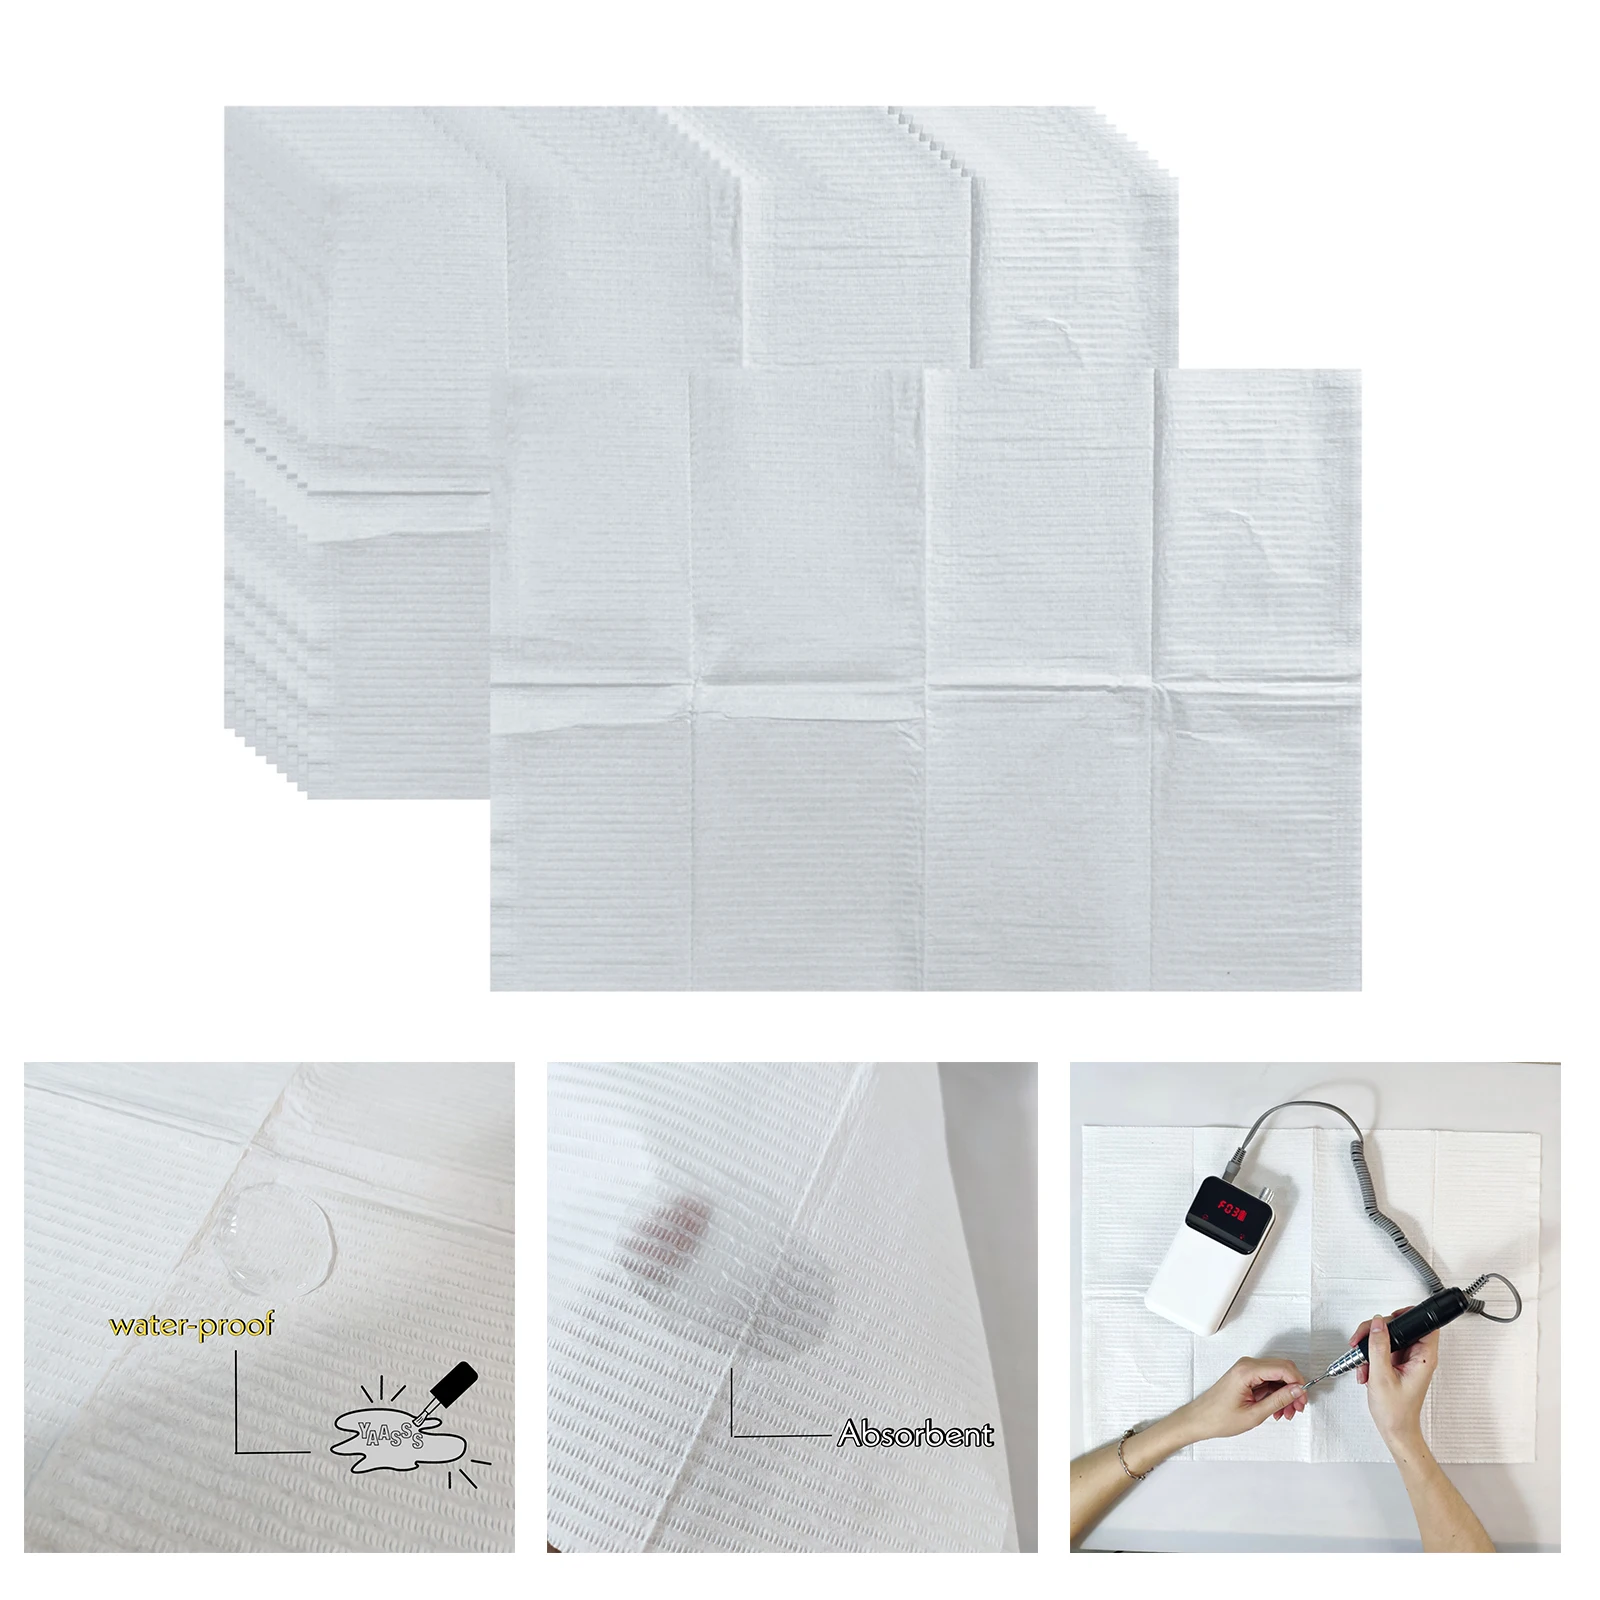 Durable Disposable Nail Art Paper Cleaning Pad Waterproof for Beauty Salon Made of Premium Materials